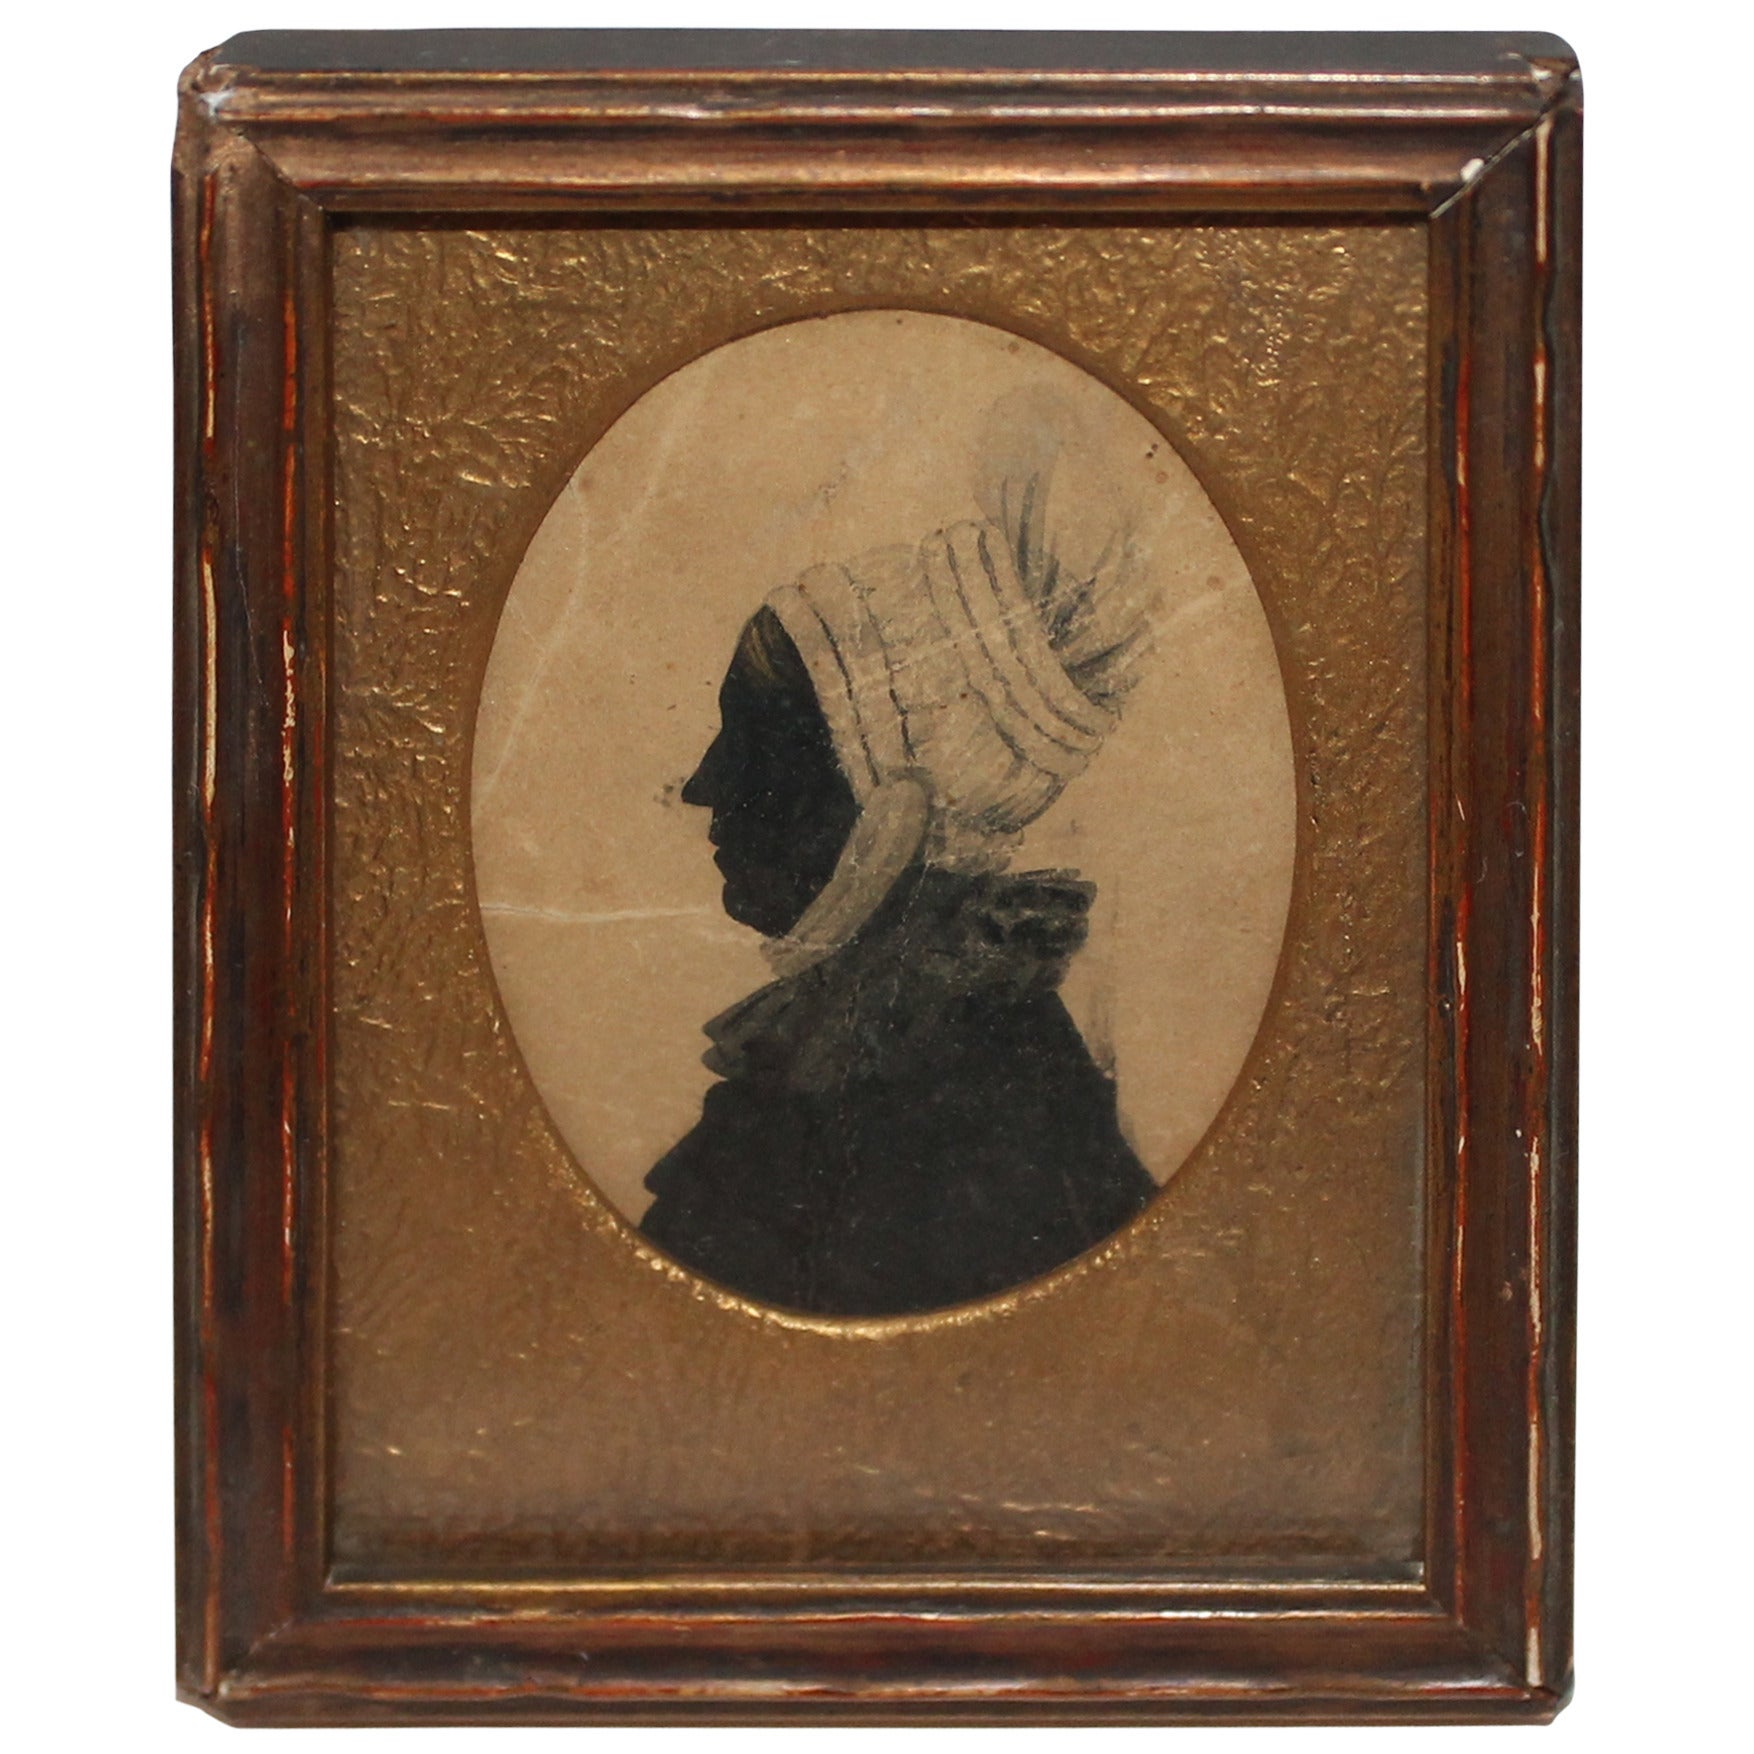 Early 19th Century Silhouette Portrait of Woman